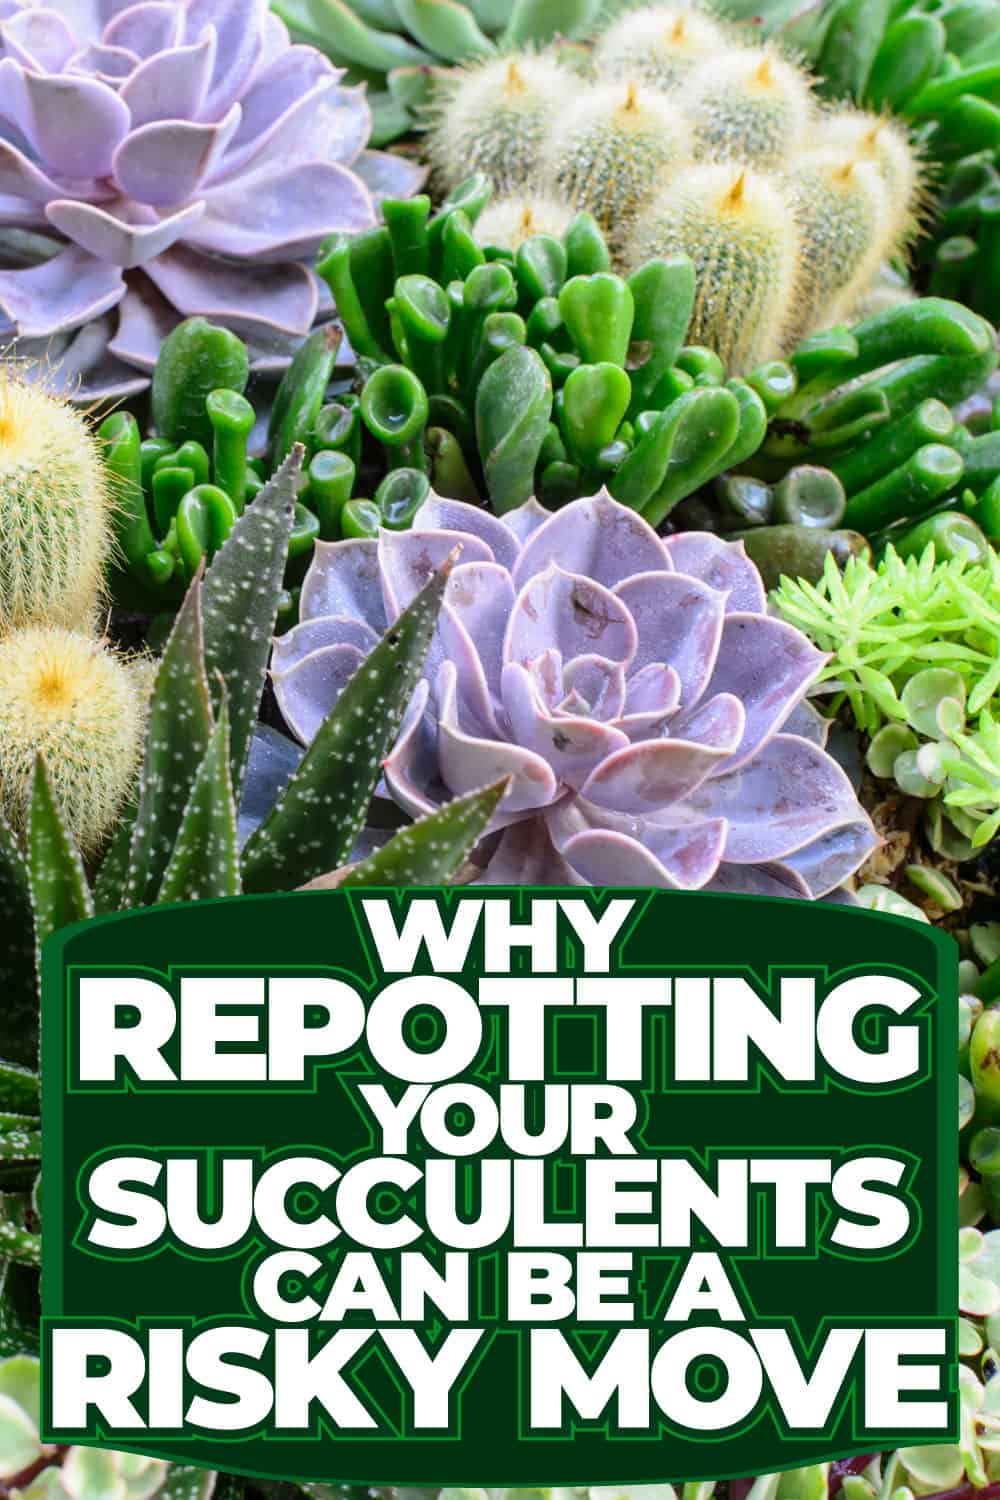 Why Repotting Your Succulents Can Be a Risky Move